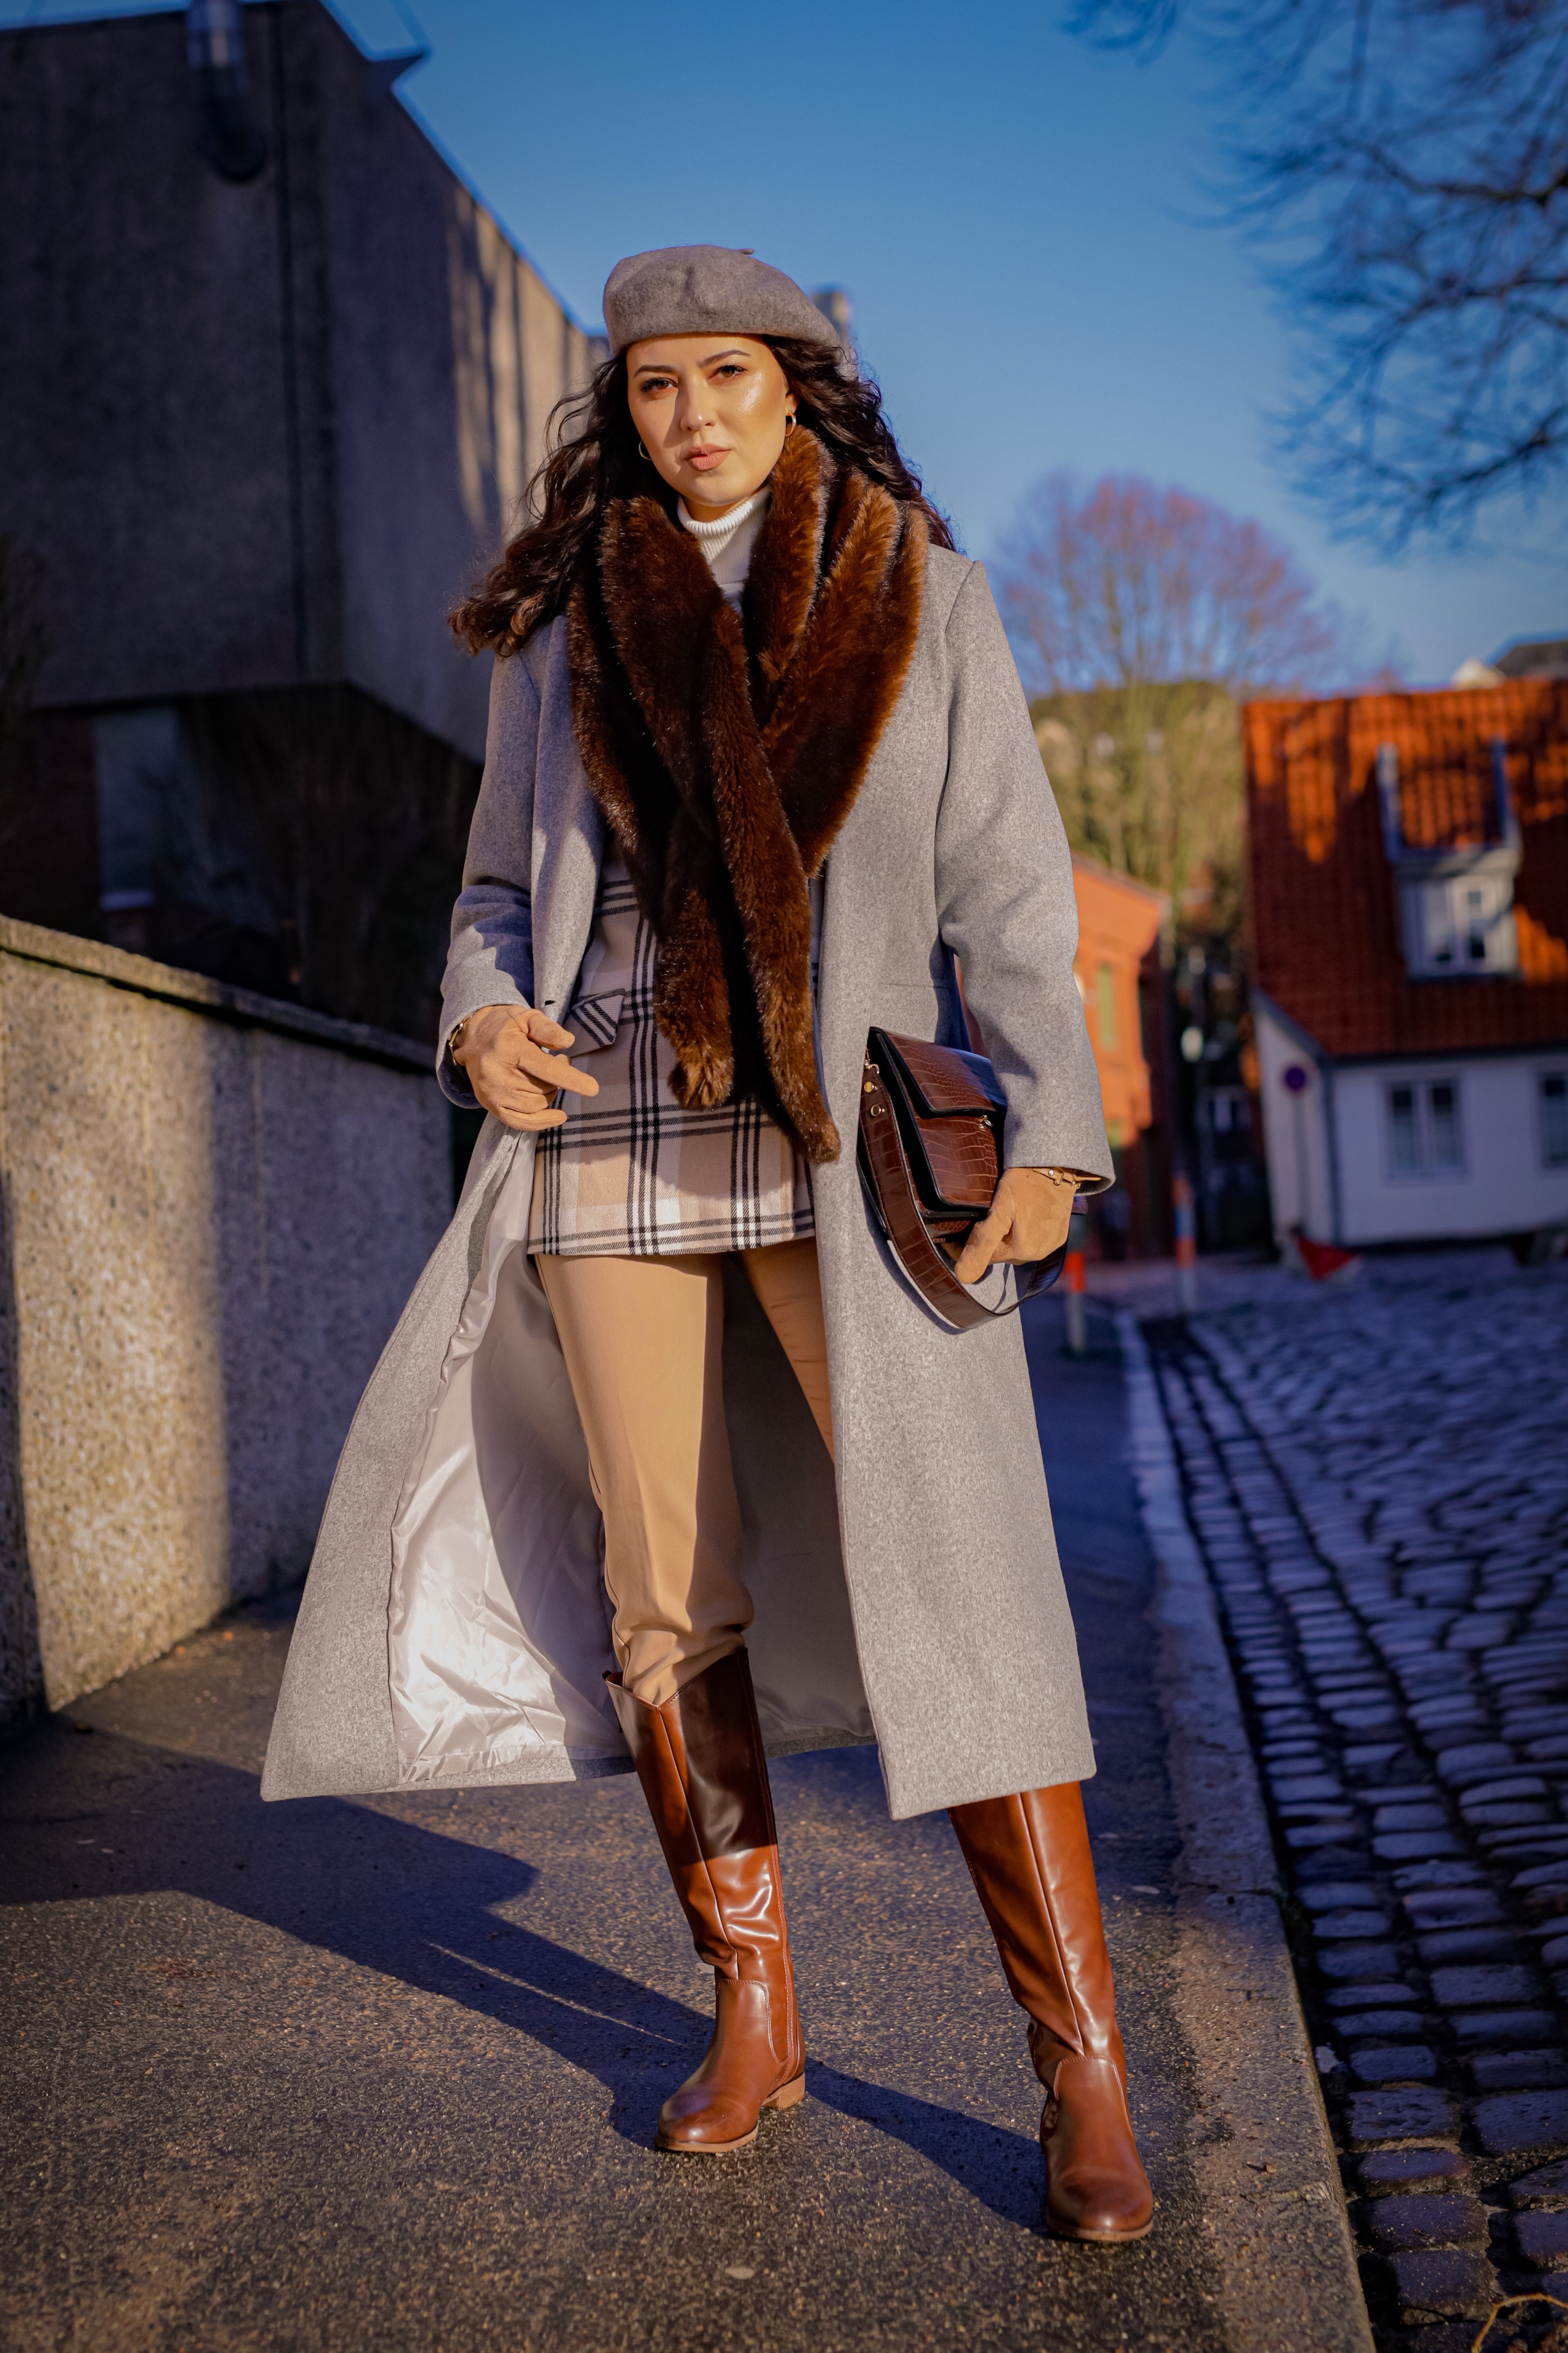 Old Money Outfit Gray Wool Coat Beige Plaid Blazer and Brown Riding Boots 2 - jpeg